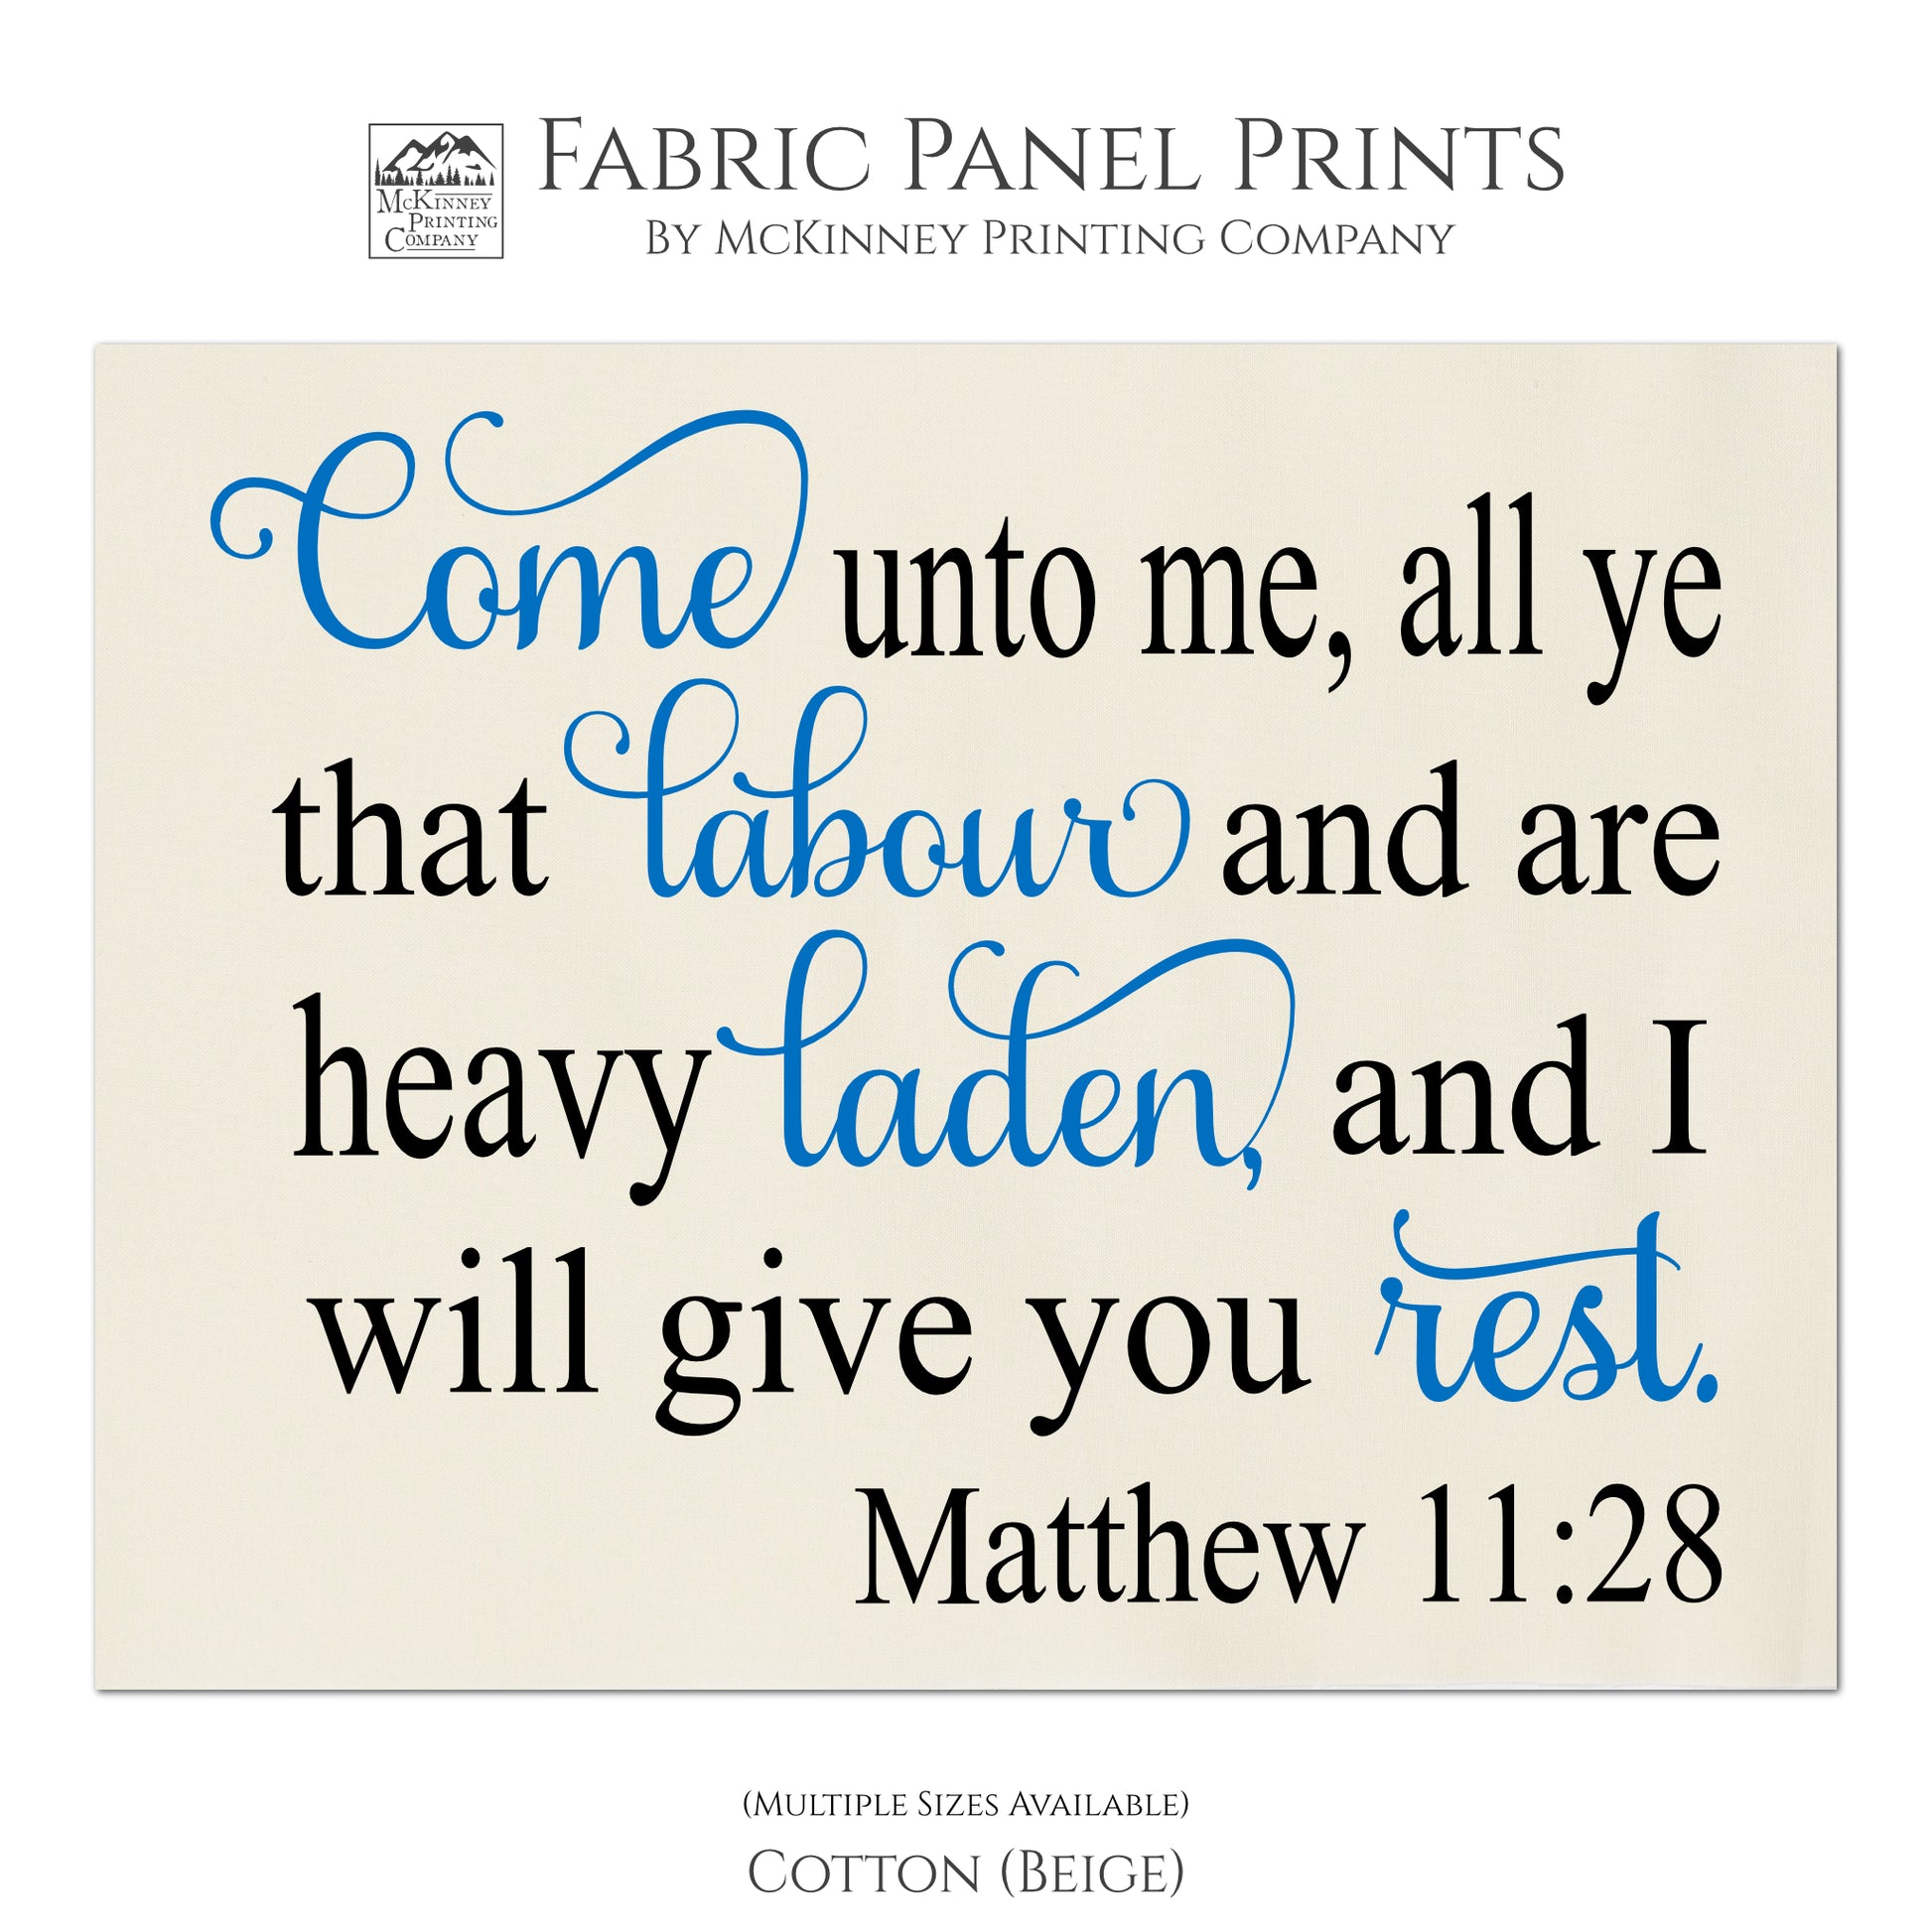 Come unto me, all ye that labor and are heavy laden, and I will give you rest - Matthew 11:28 - Fabric Panel Print, Quilt Block, Wall Art - Cotton